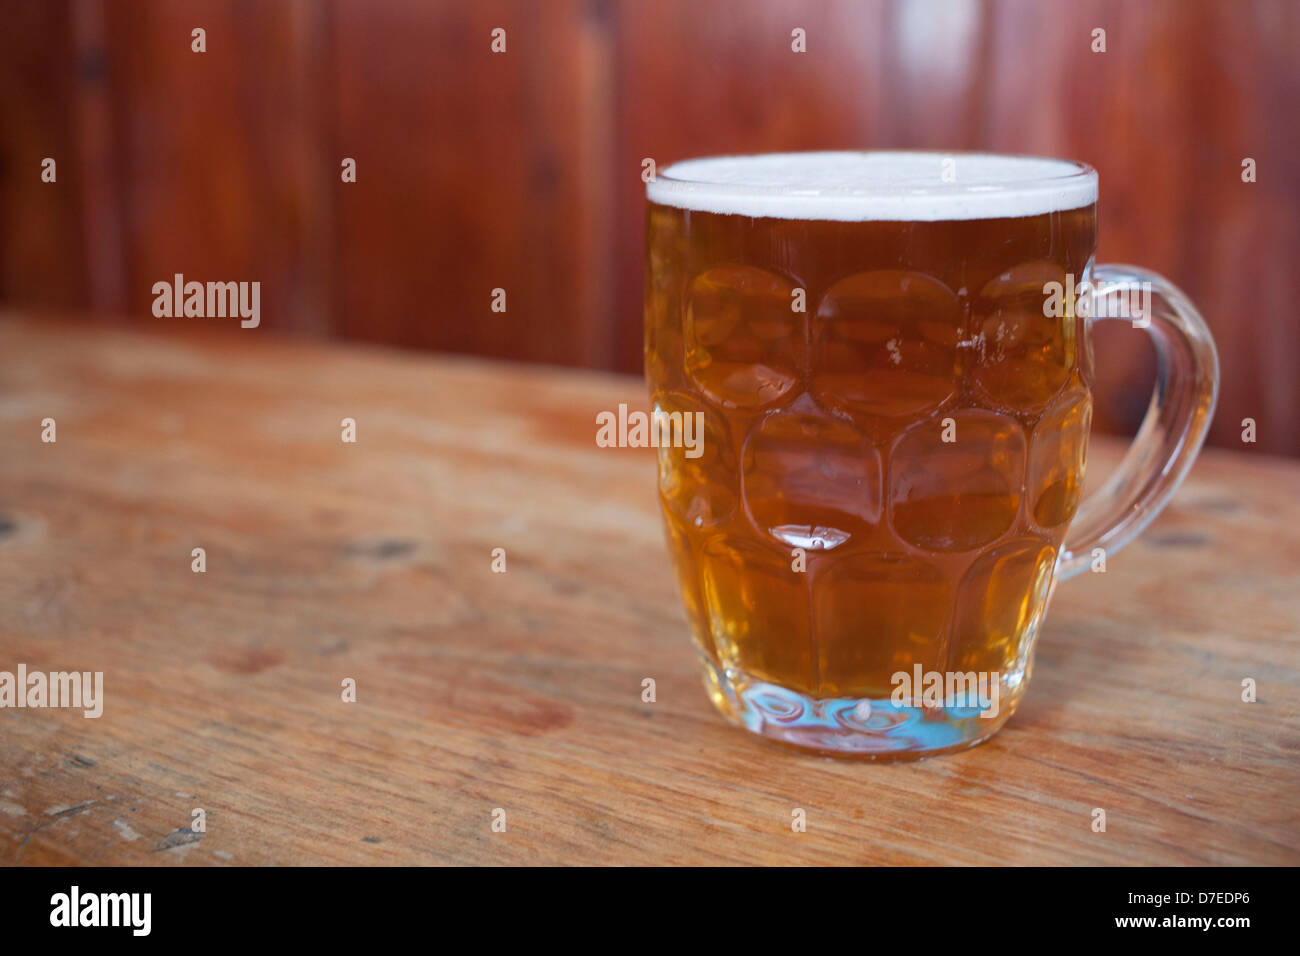 Pint of ale in an old fashioned jug beer glass. Stock Photo